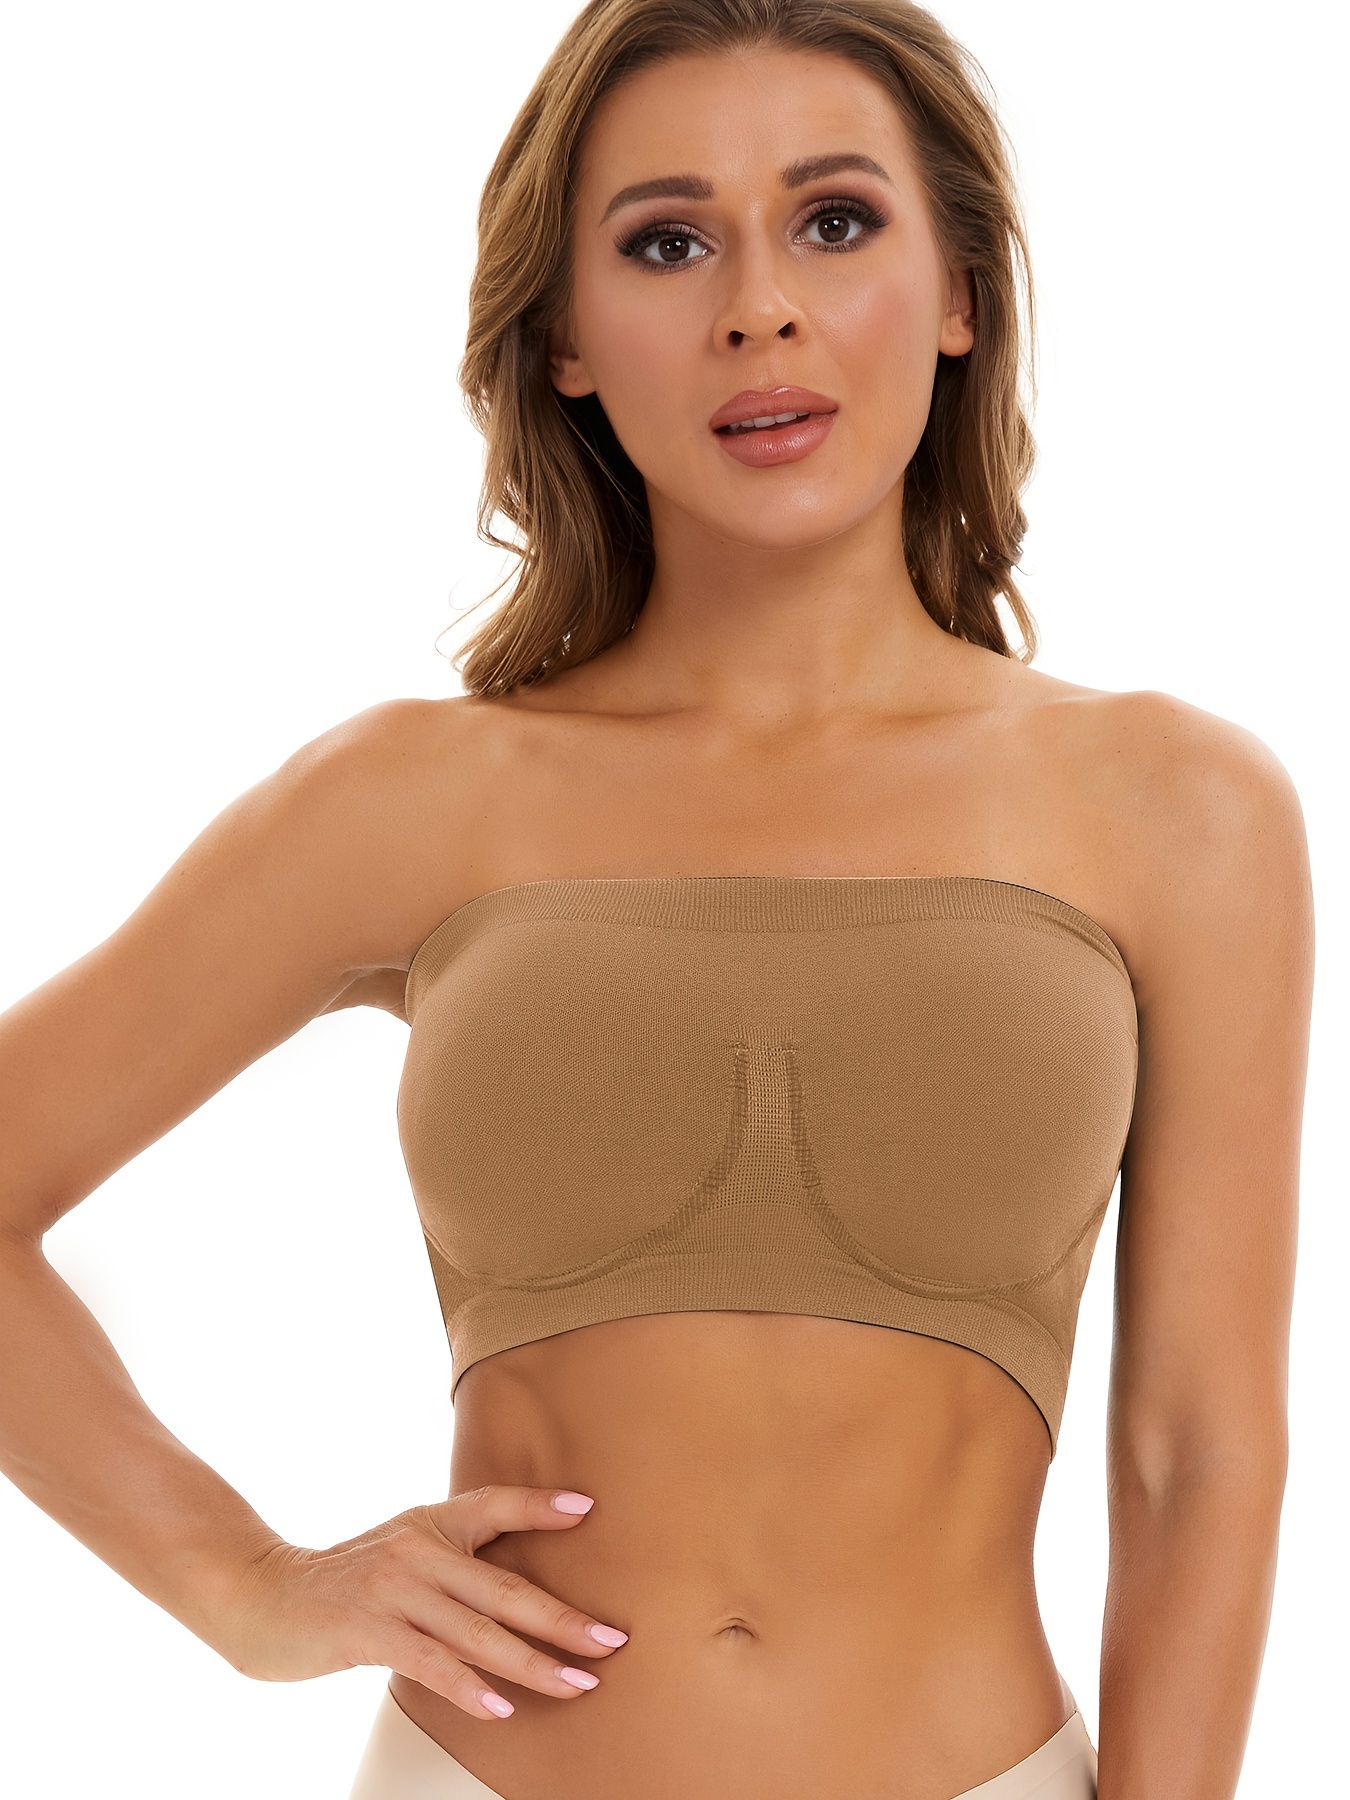 Tube Top Bra Seamless Strapless Bralette Stretch Wrapped Women Chest Bust  ca 